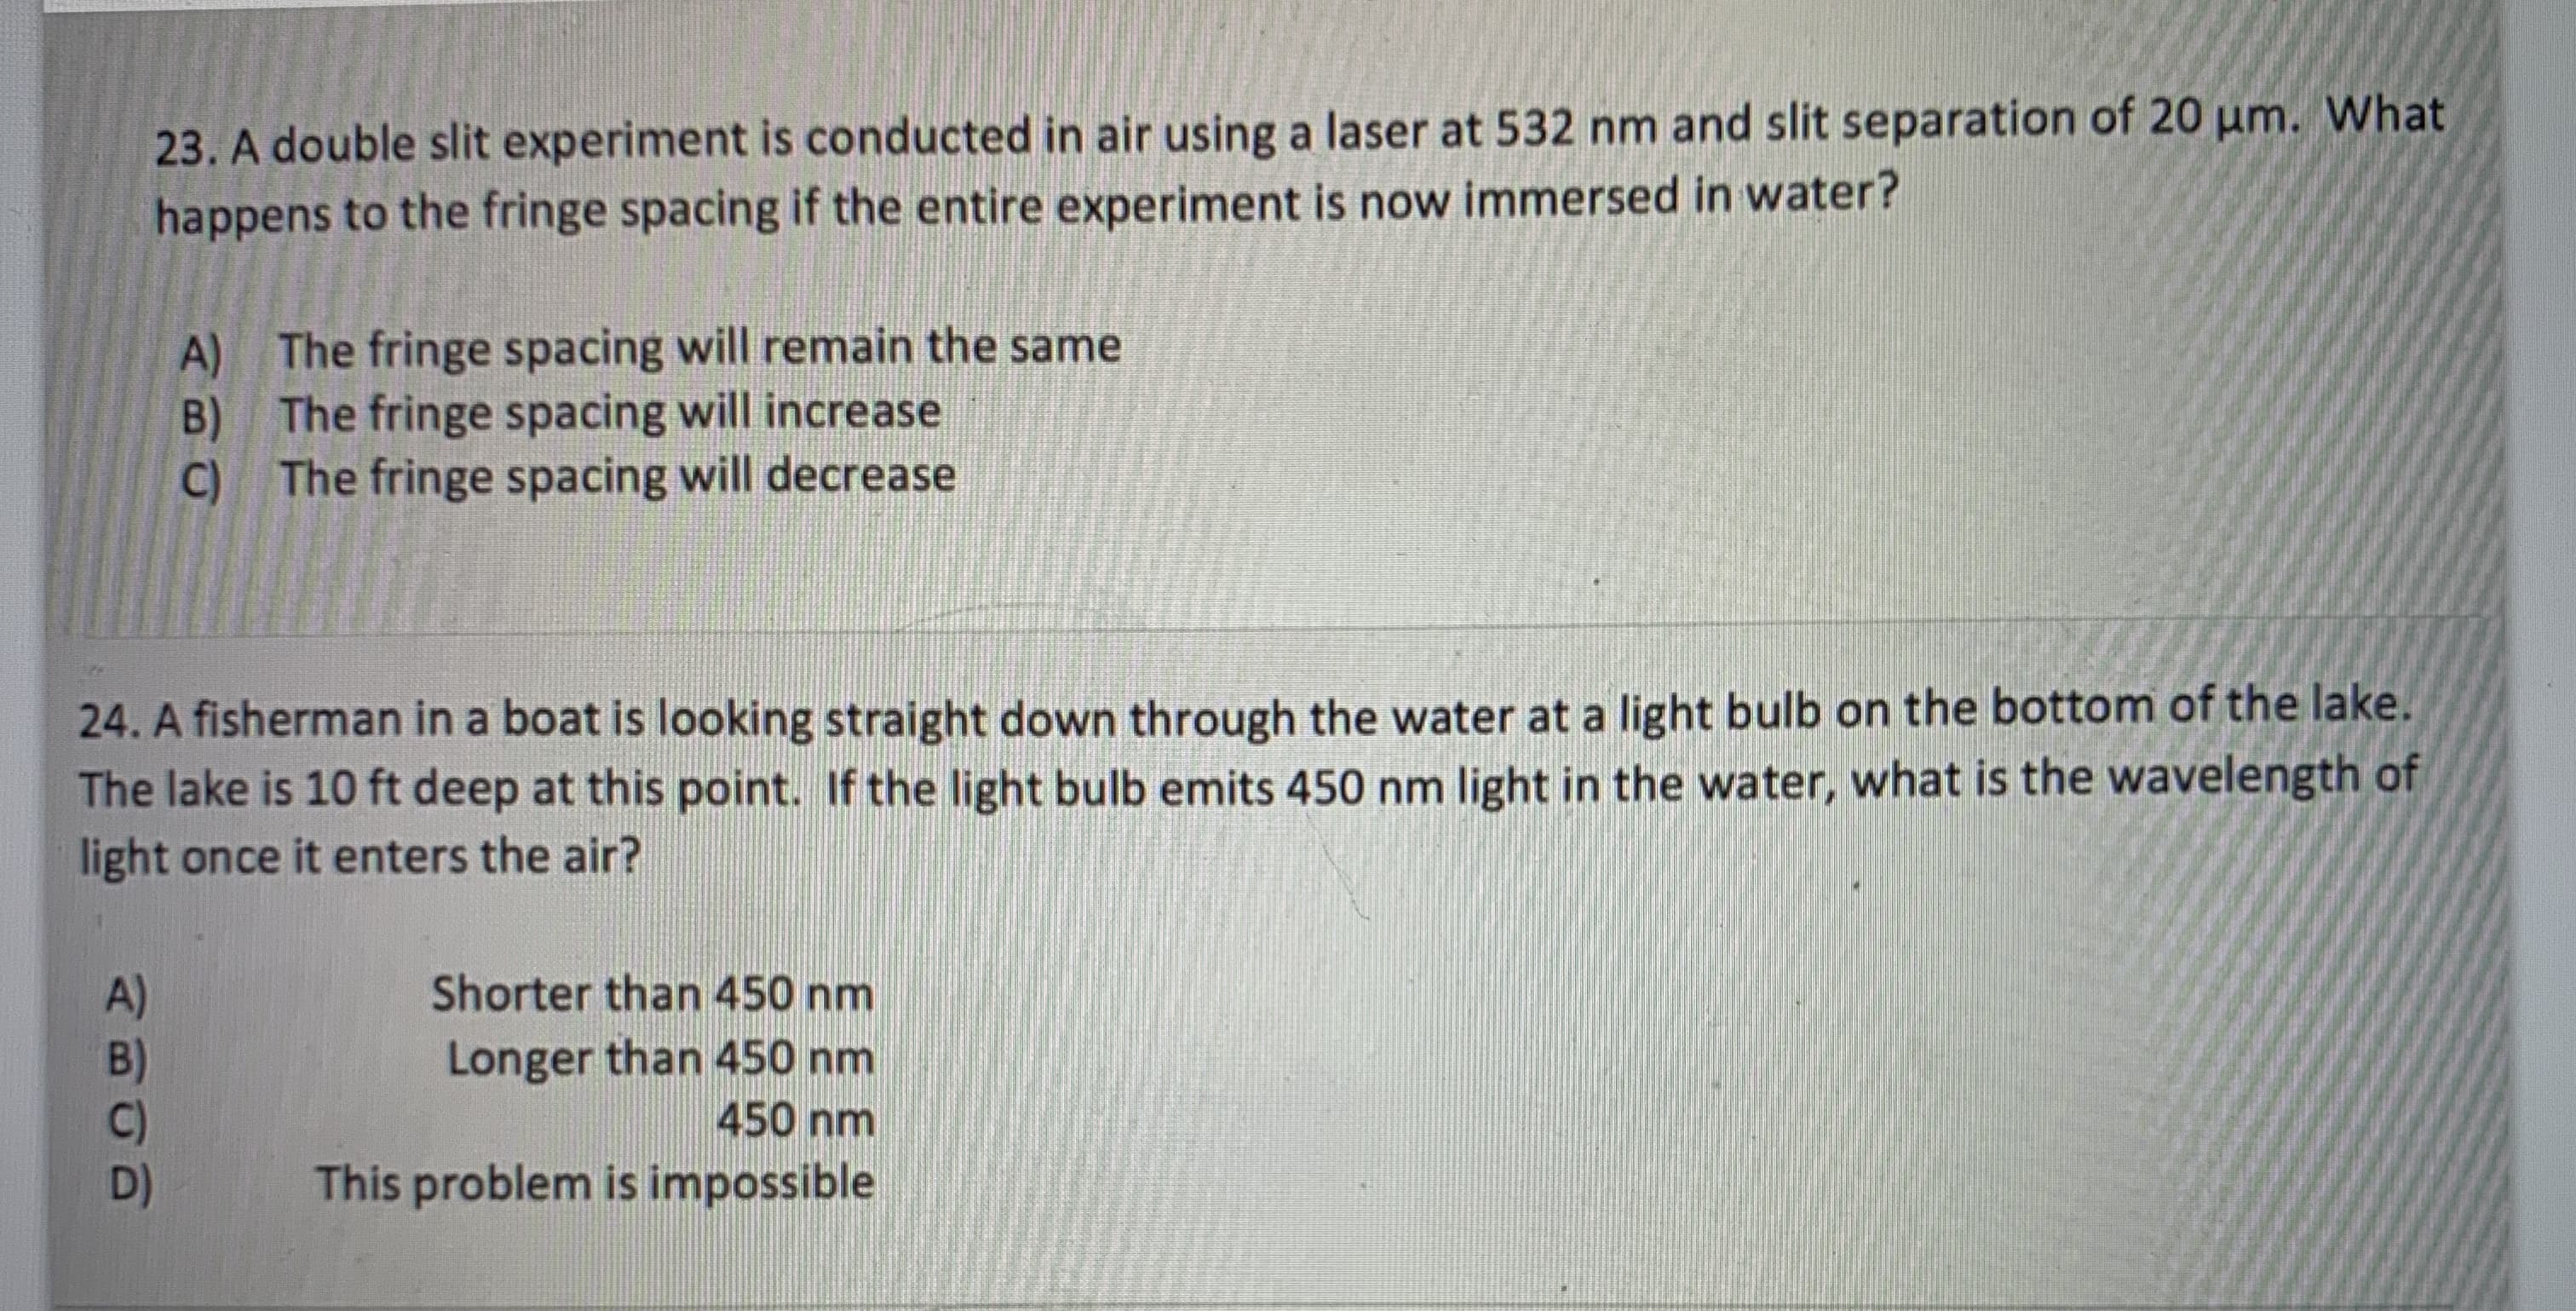 23. A double slit experiment is conducted in air using a laser at 532 nm and slit separation of 20 um. What
happens to the fringe spacing if the entire experiment is now immersed in water?
A) The fringe spacing will remain the same
B) The fringe spacing will increase
C) The fringe spacing will decrease
